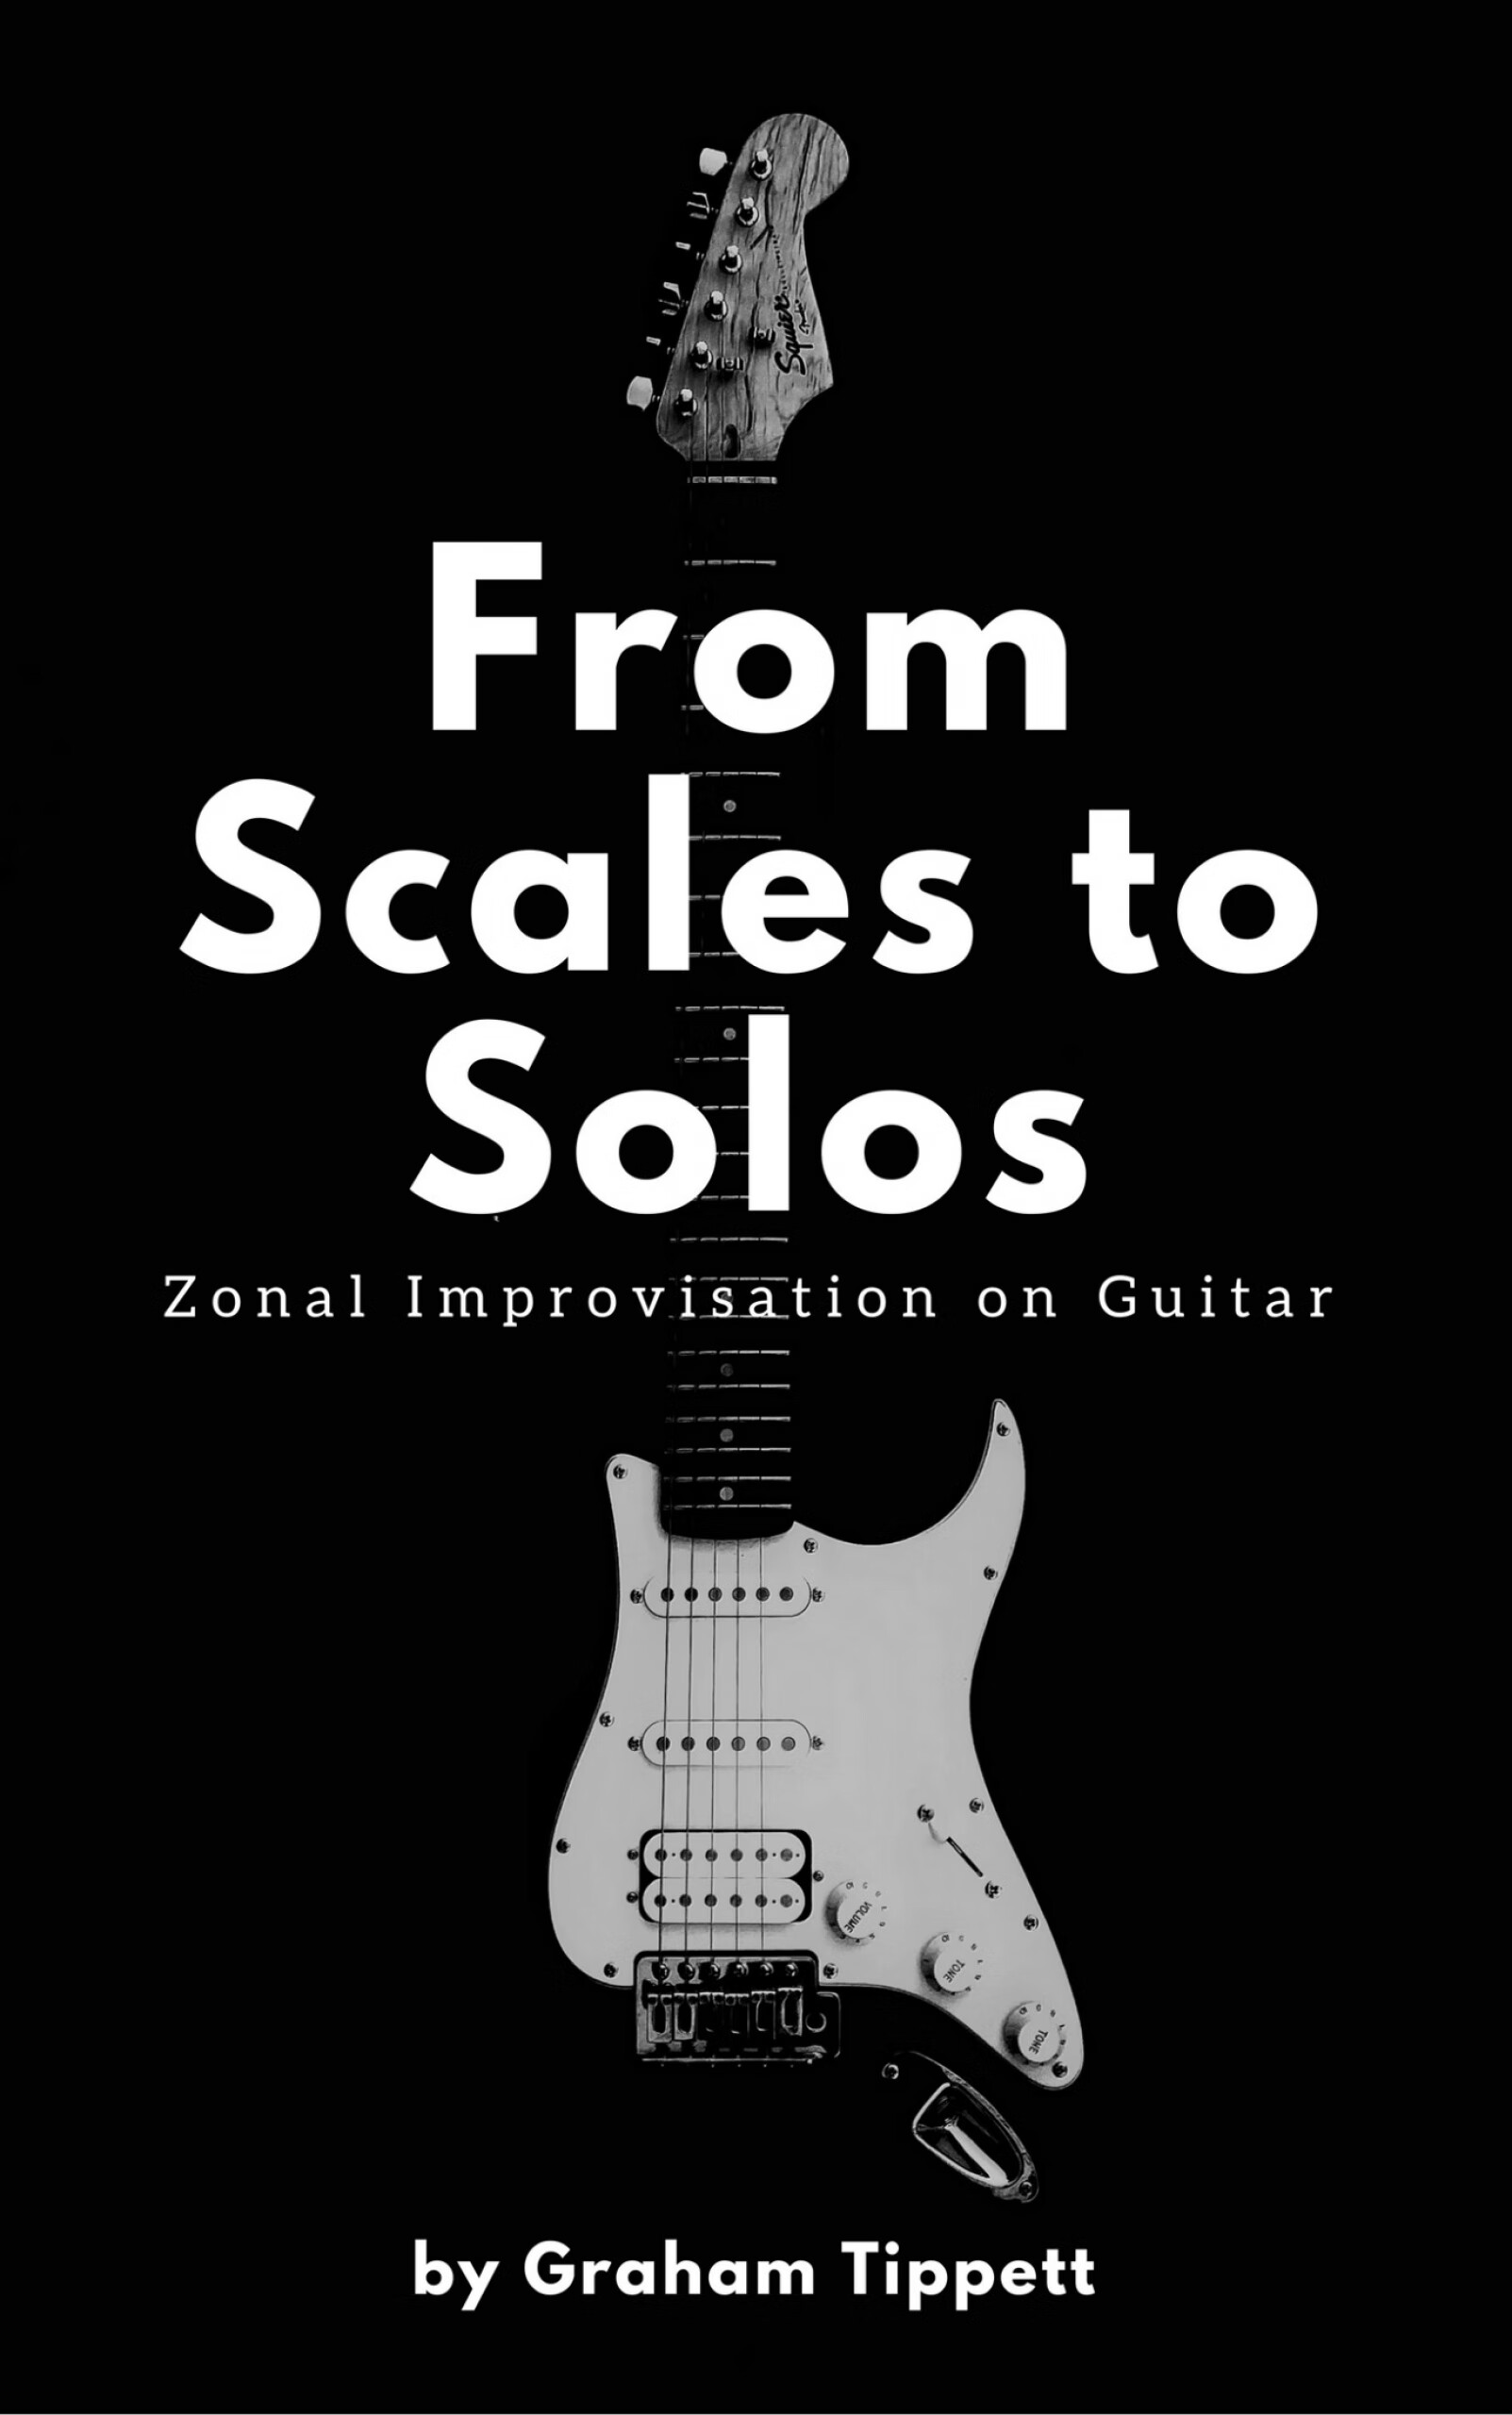 From Scales to Solos